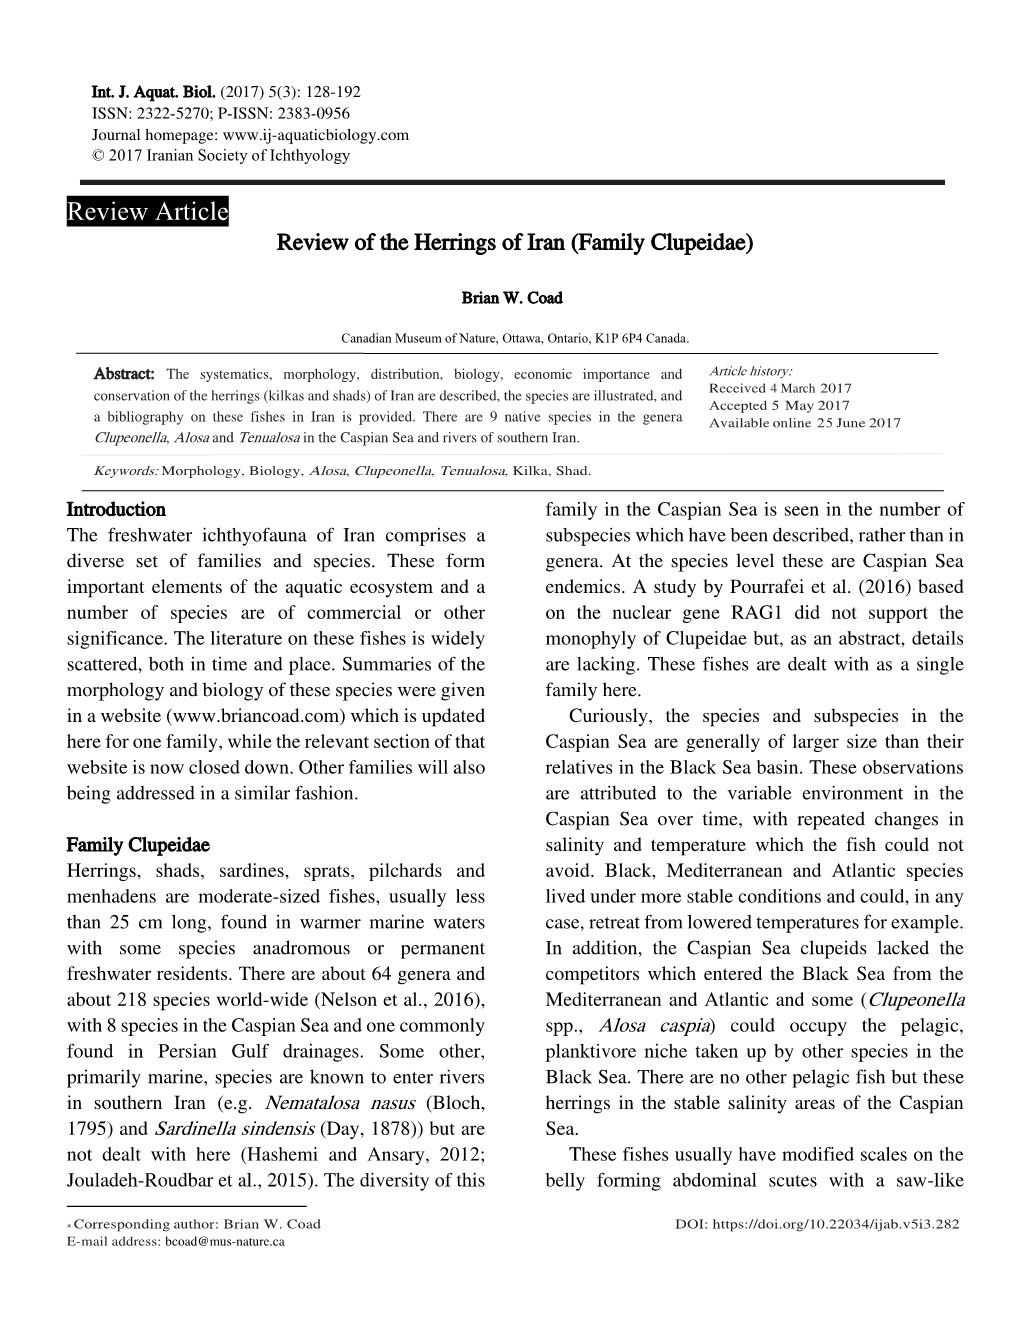 Review Article Review of the Herrings of Iran (Family Clupeidae)